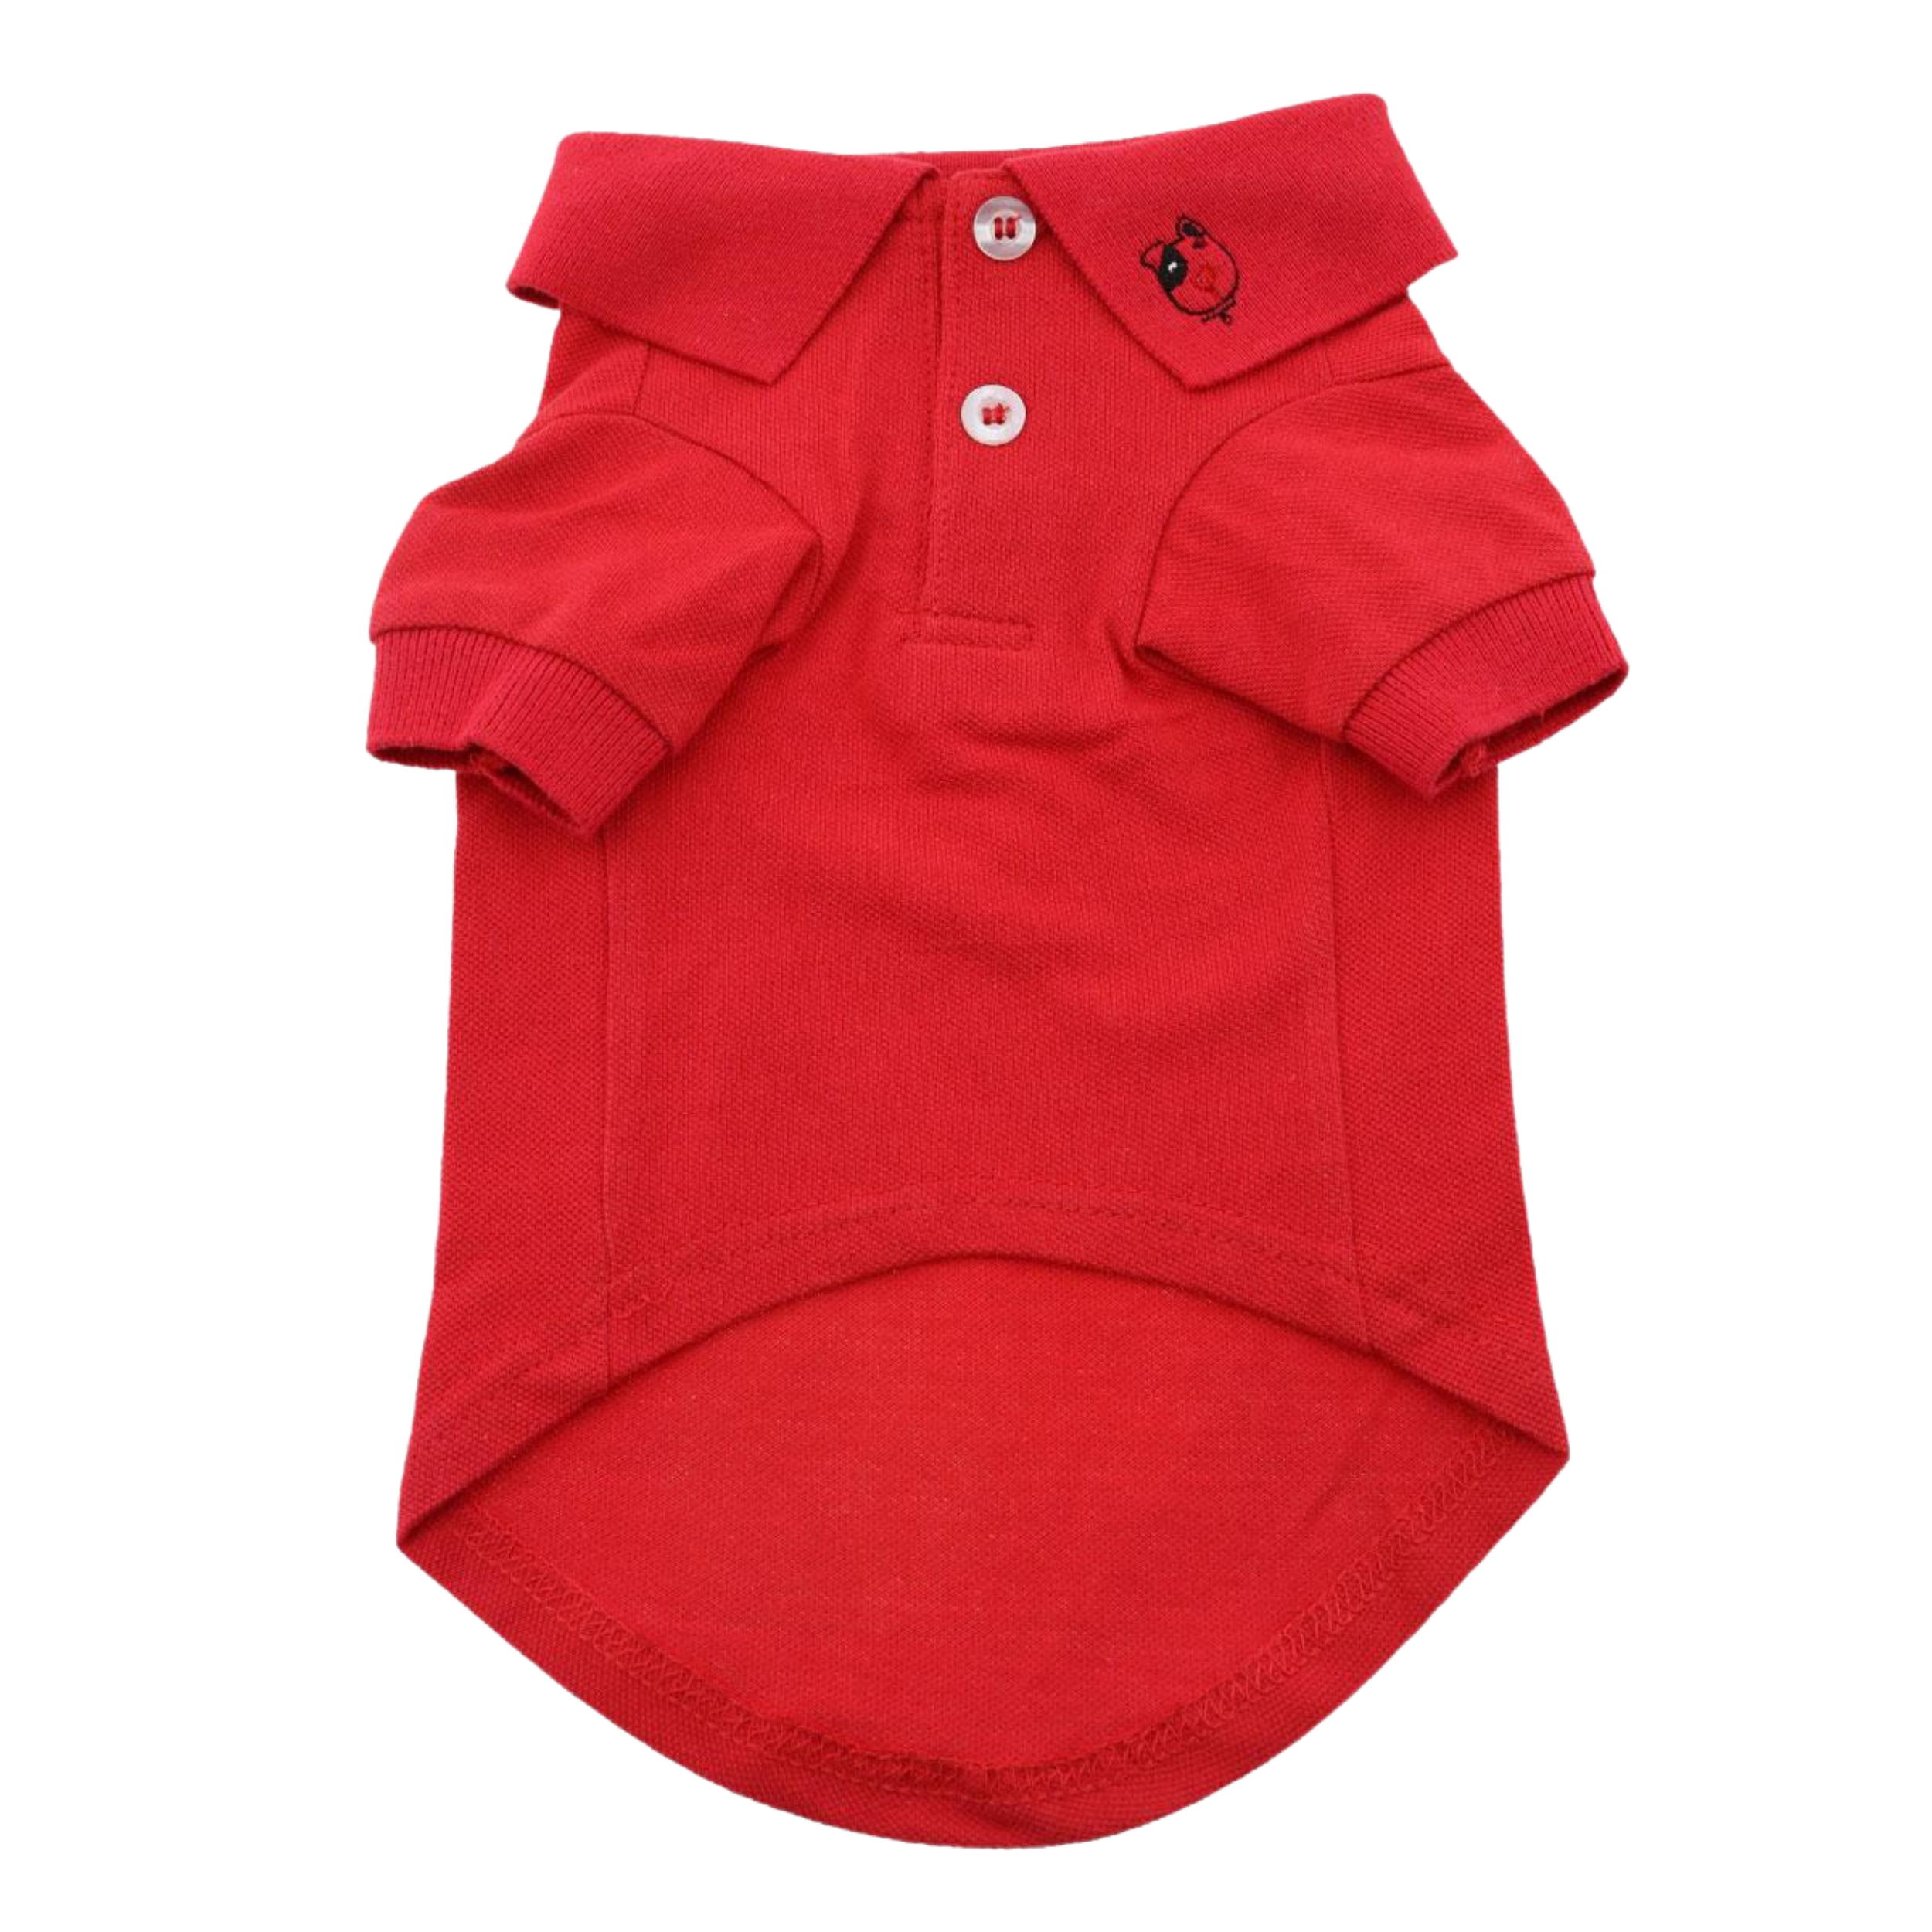 DOG-POLO-SHIRT-SCARLET-RED